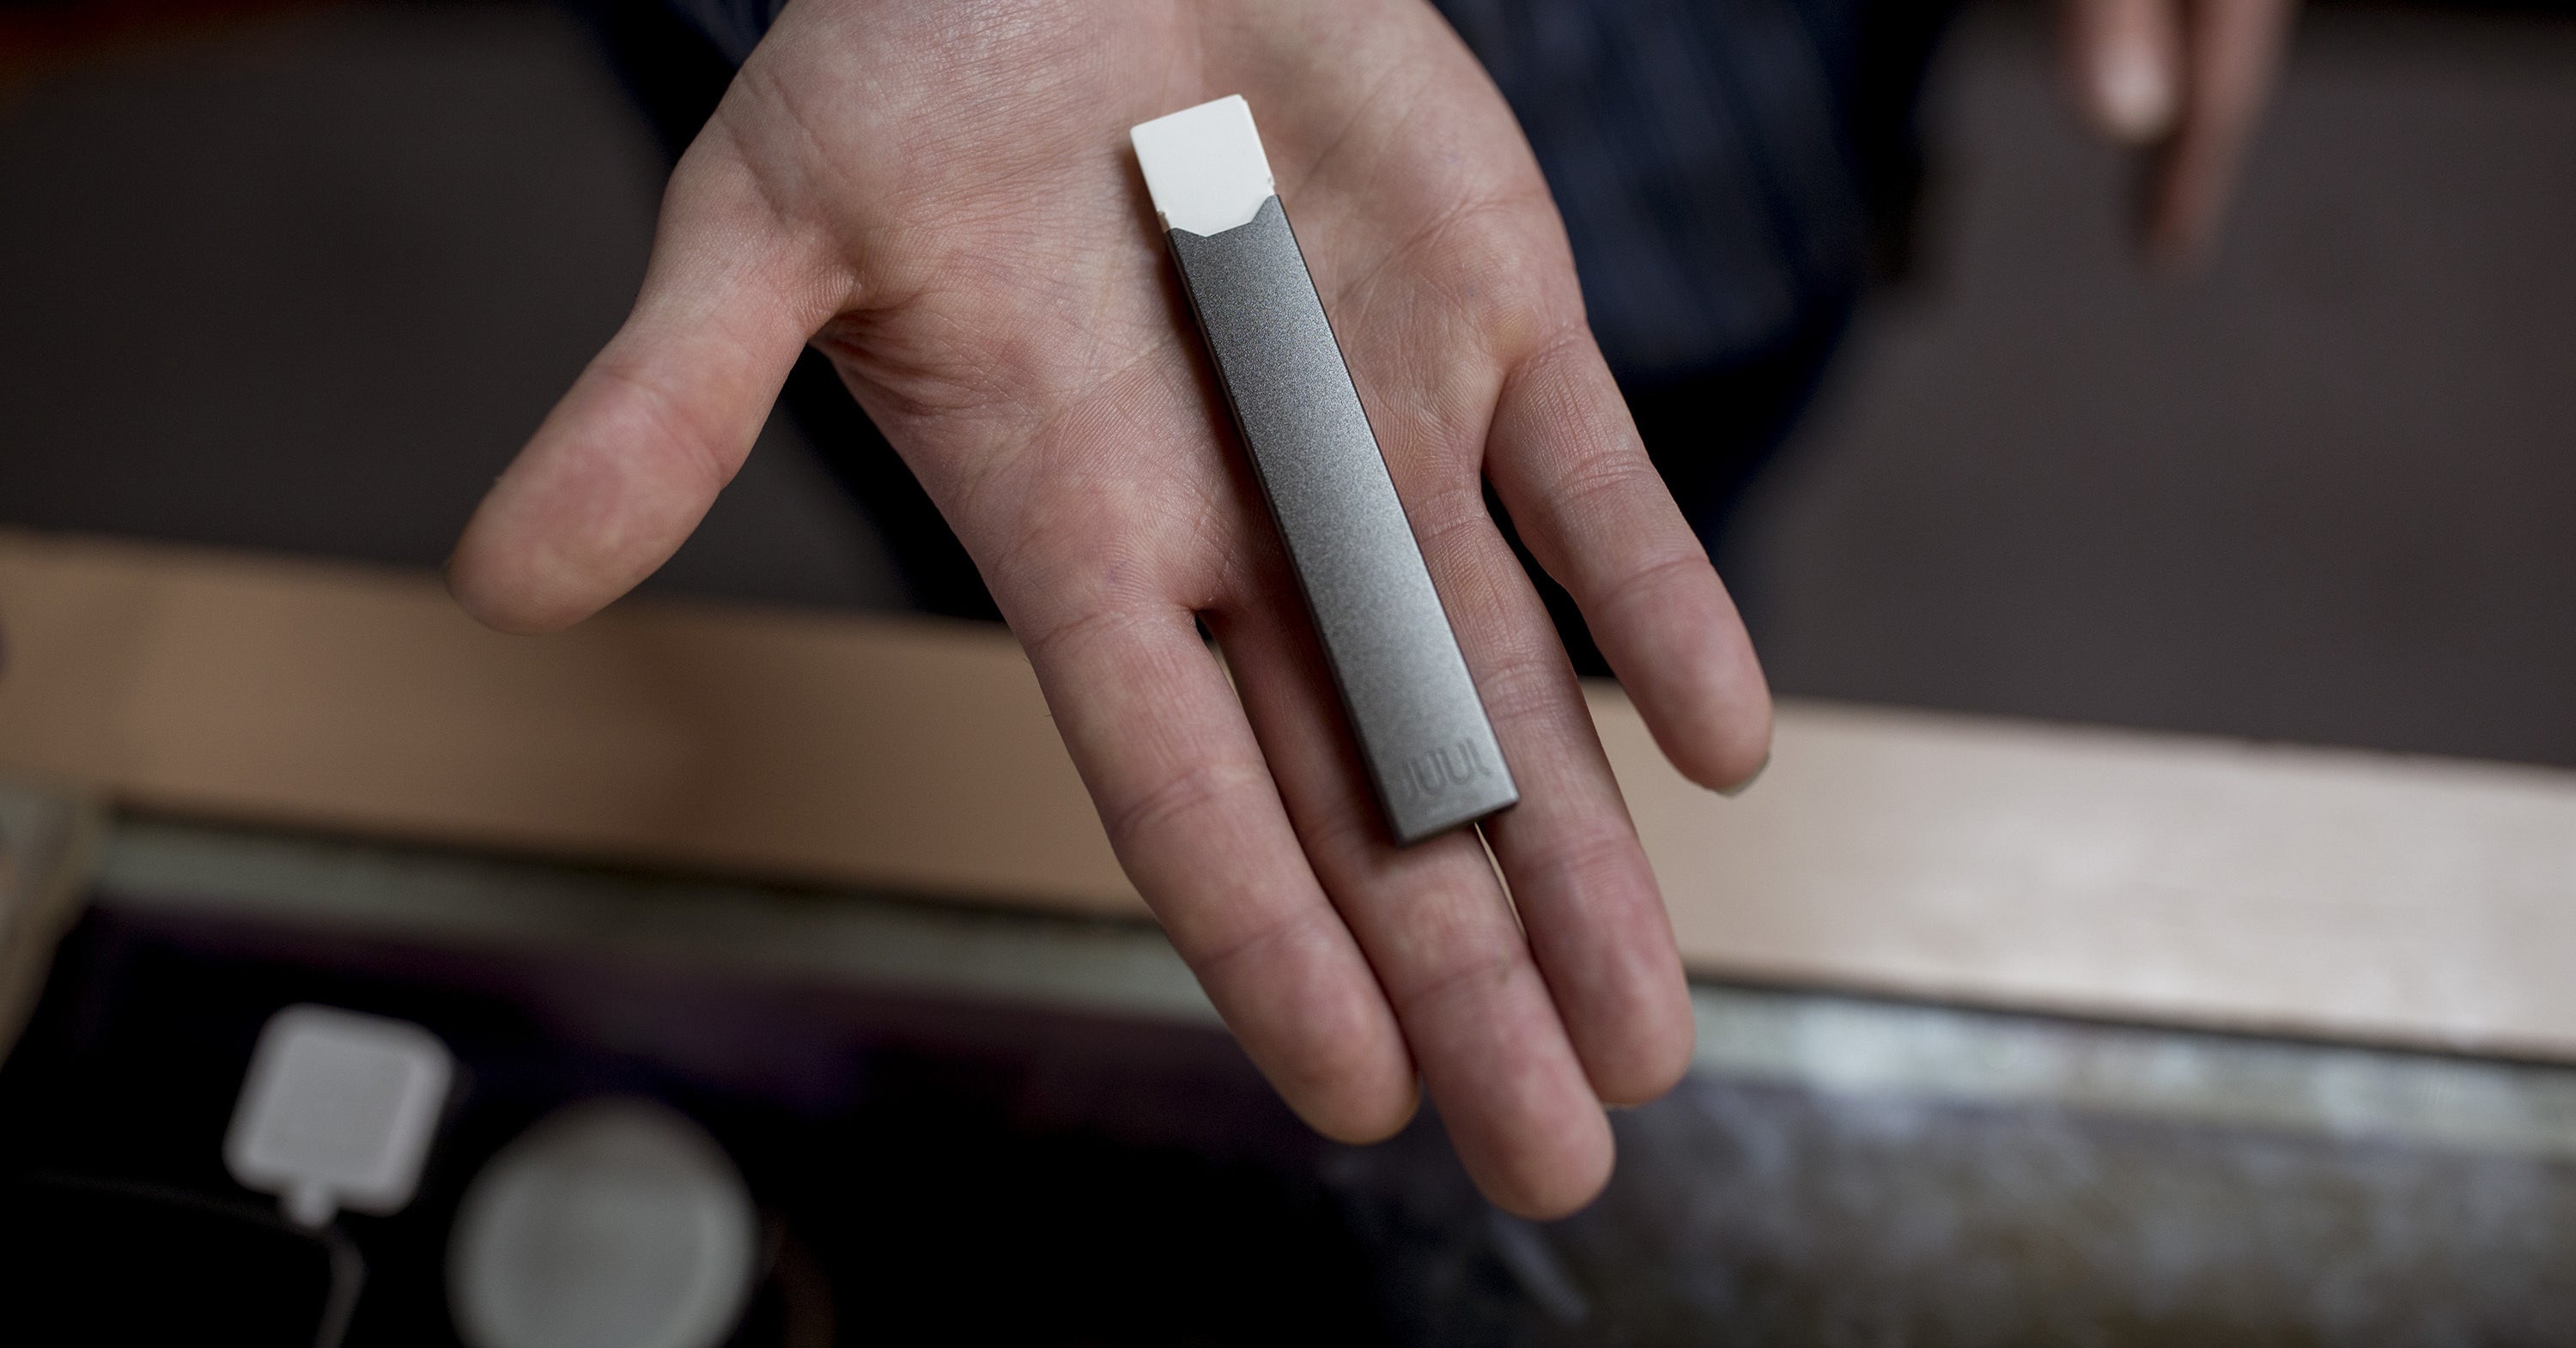 New Flavored E-Cigarettes Are Bad For Teens, Doctors Say In New FDA Lawsuit